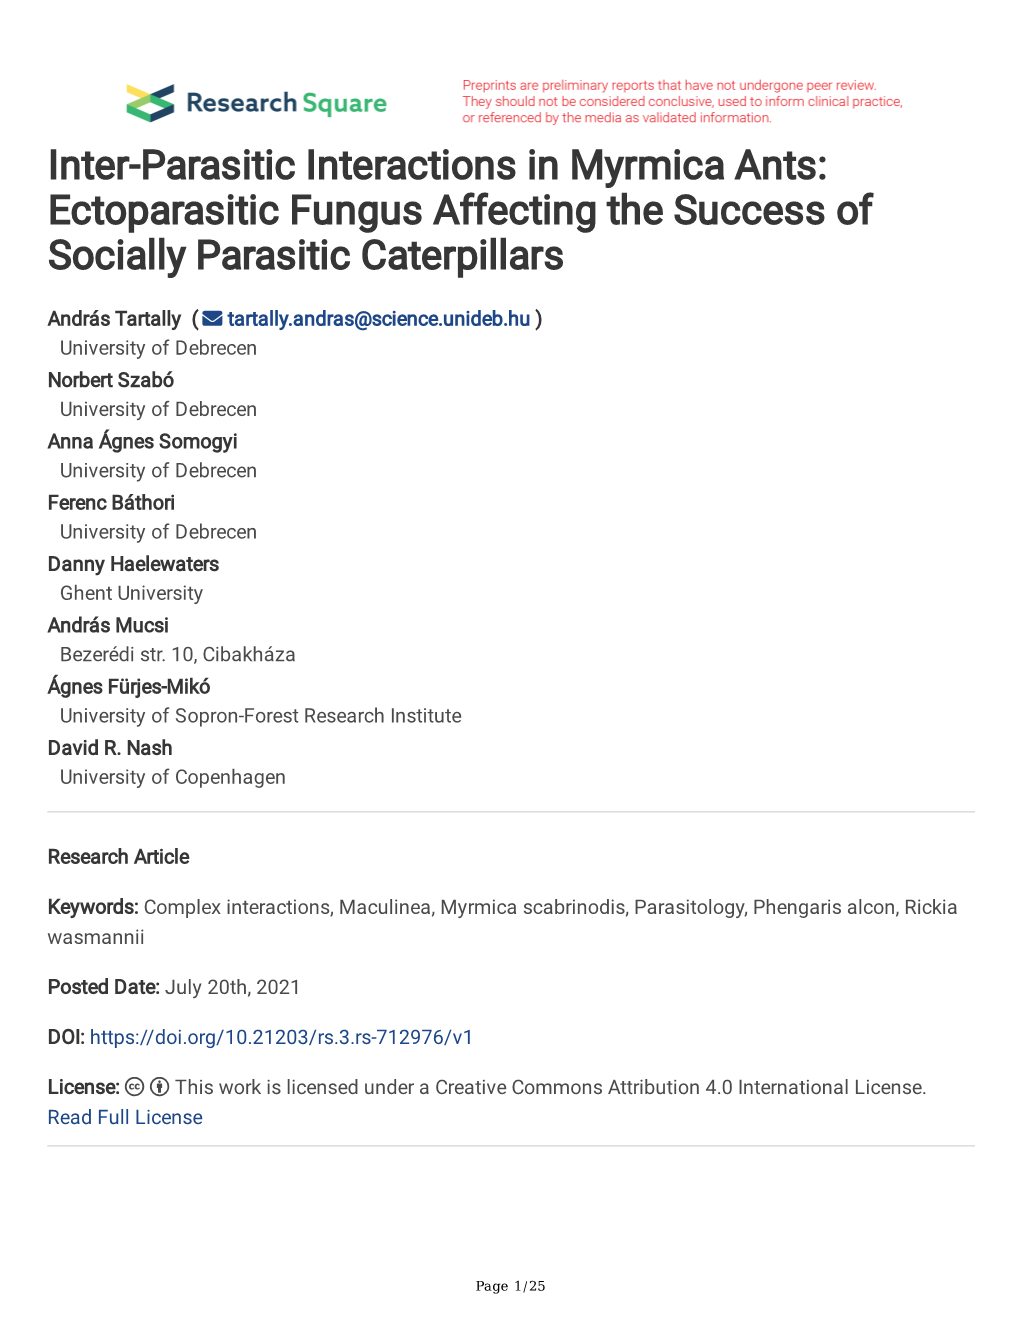 Inter-Parasitic Interactions in Myrmica Ants: Ectoparasitic Fungus Affecting the Success of Socially Parasitic Caterpillars